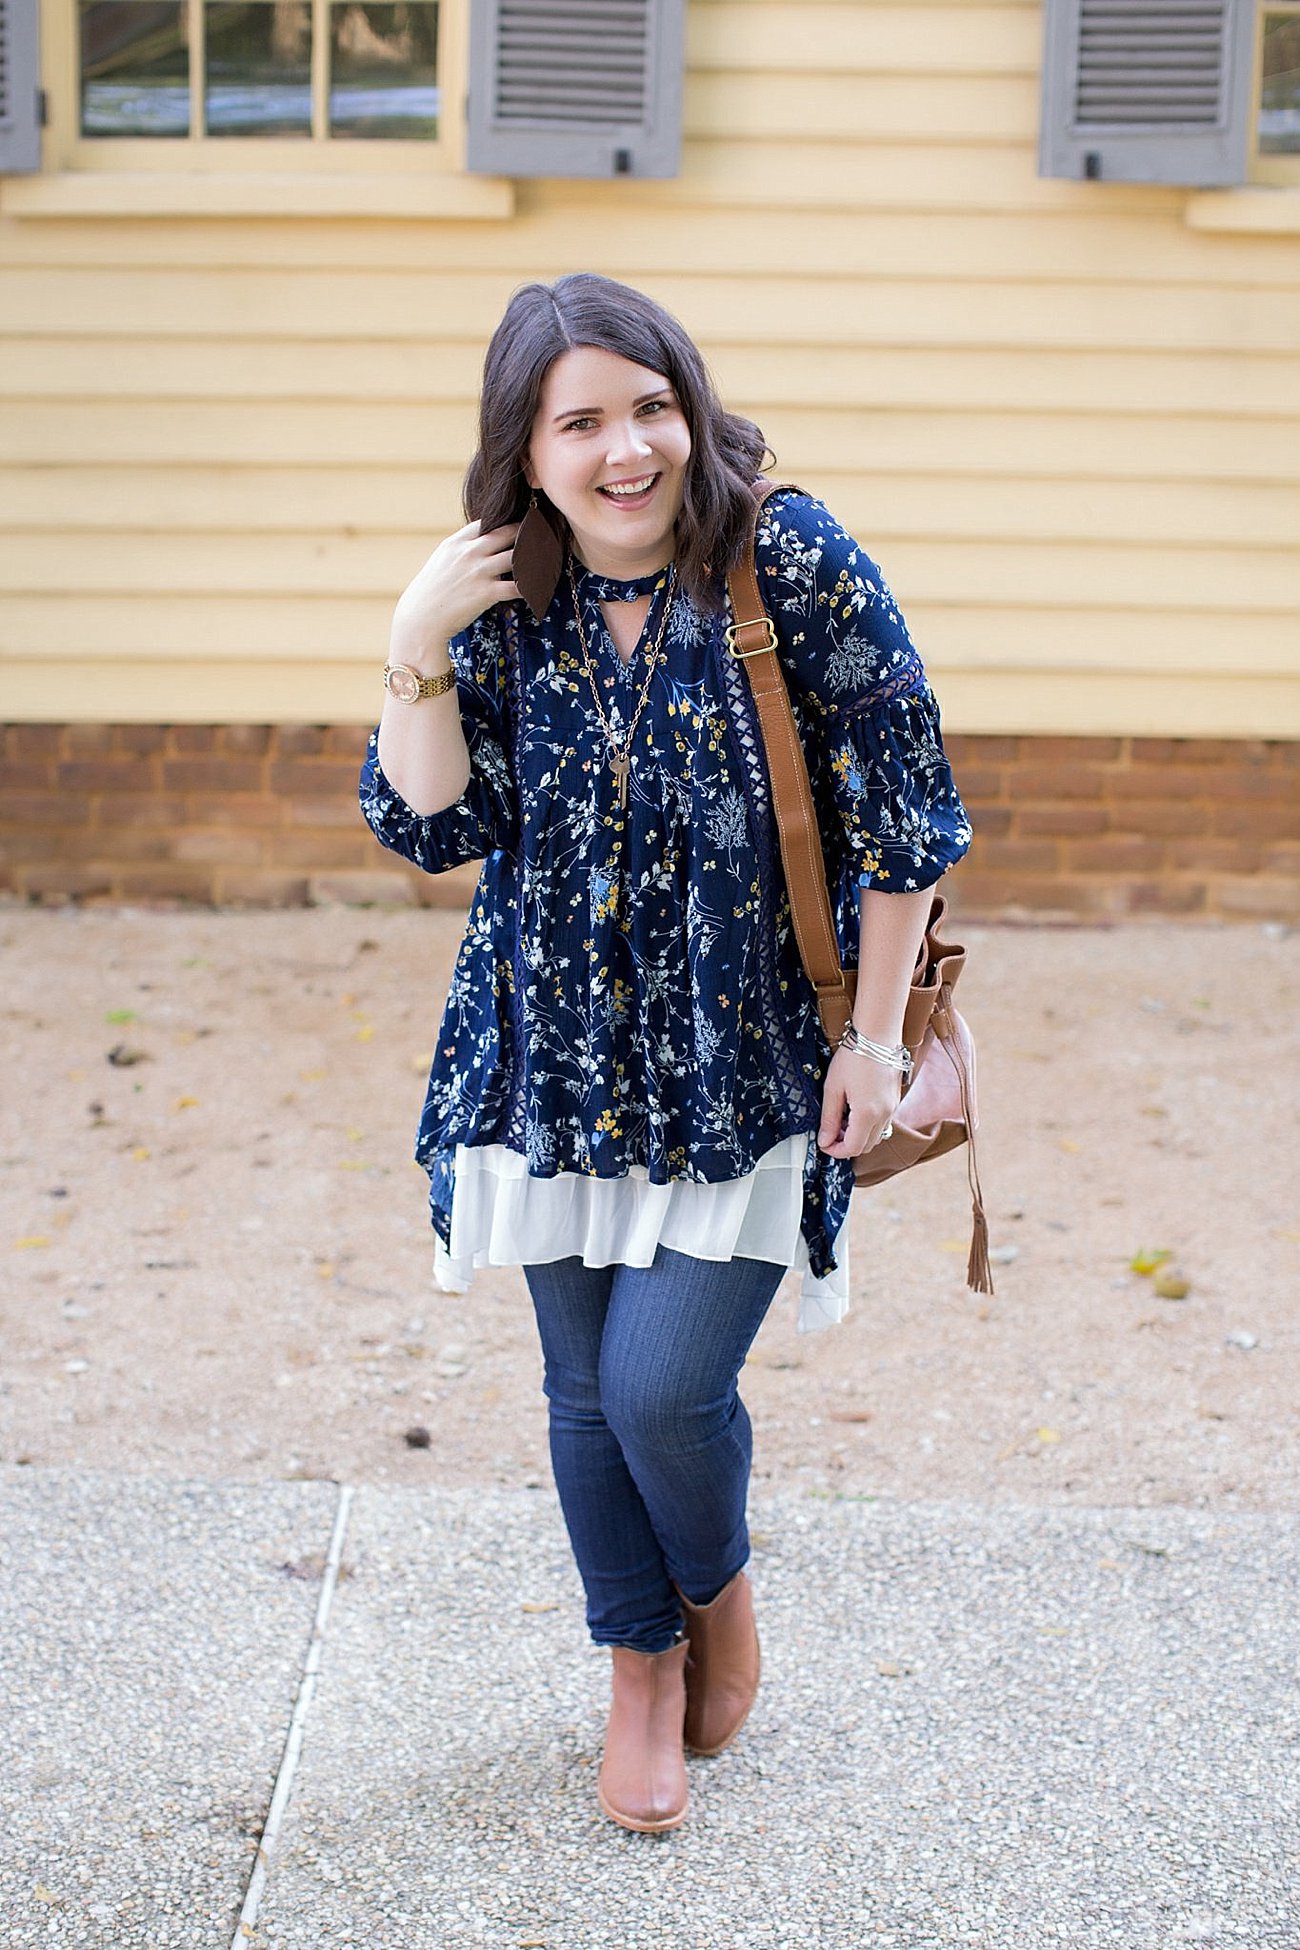 Grace & Lace peasant top and chiffon lace extender from The Flourish Market, Paige denim, Root Collective espe booties | Ethical Fashion, North Carolina Life and Style Blogger (2)